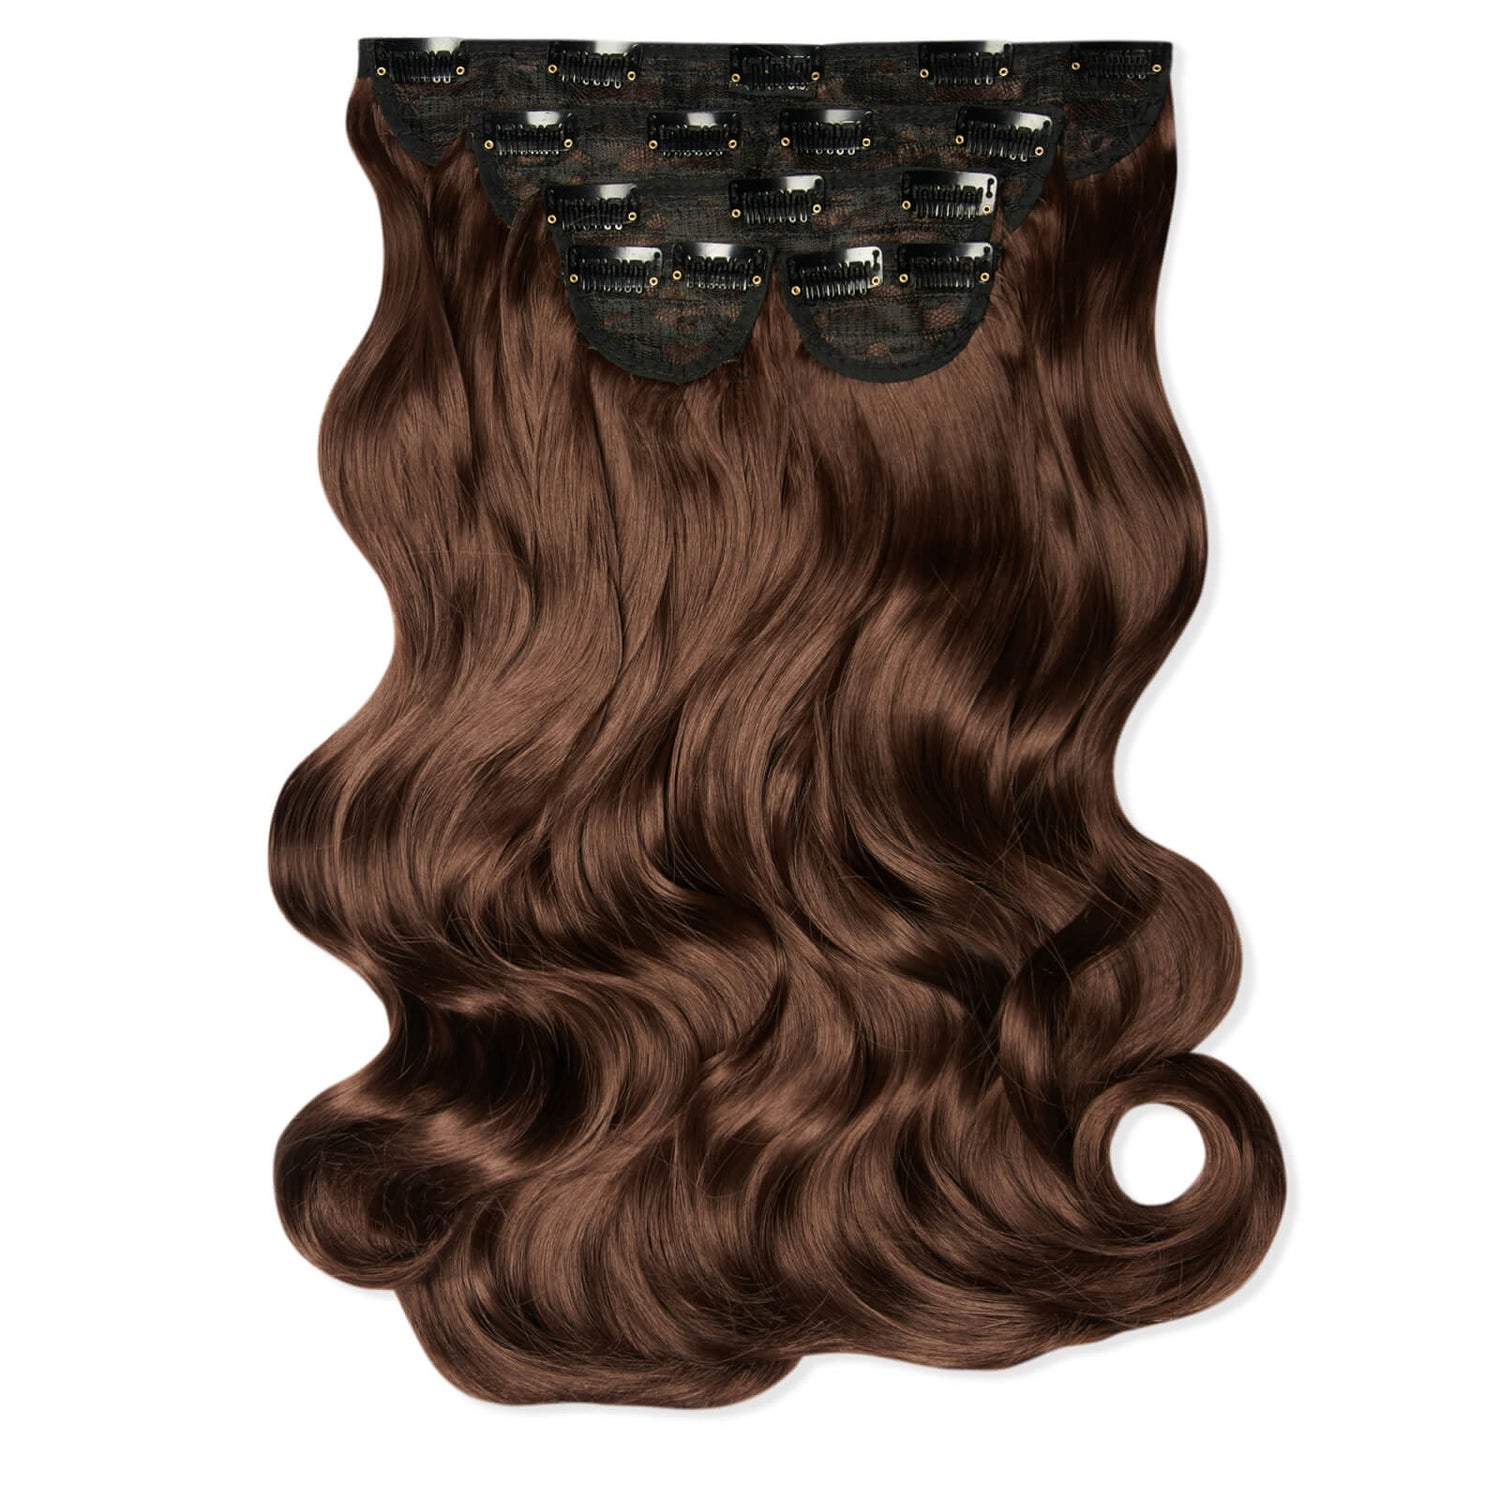 LullaBellz Super Thick 22" 5 Piece Natural Wavy Clip In Extensions (Various Shades)